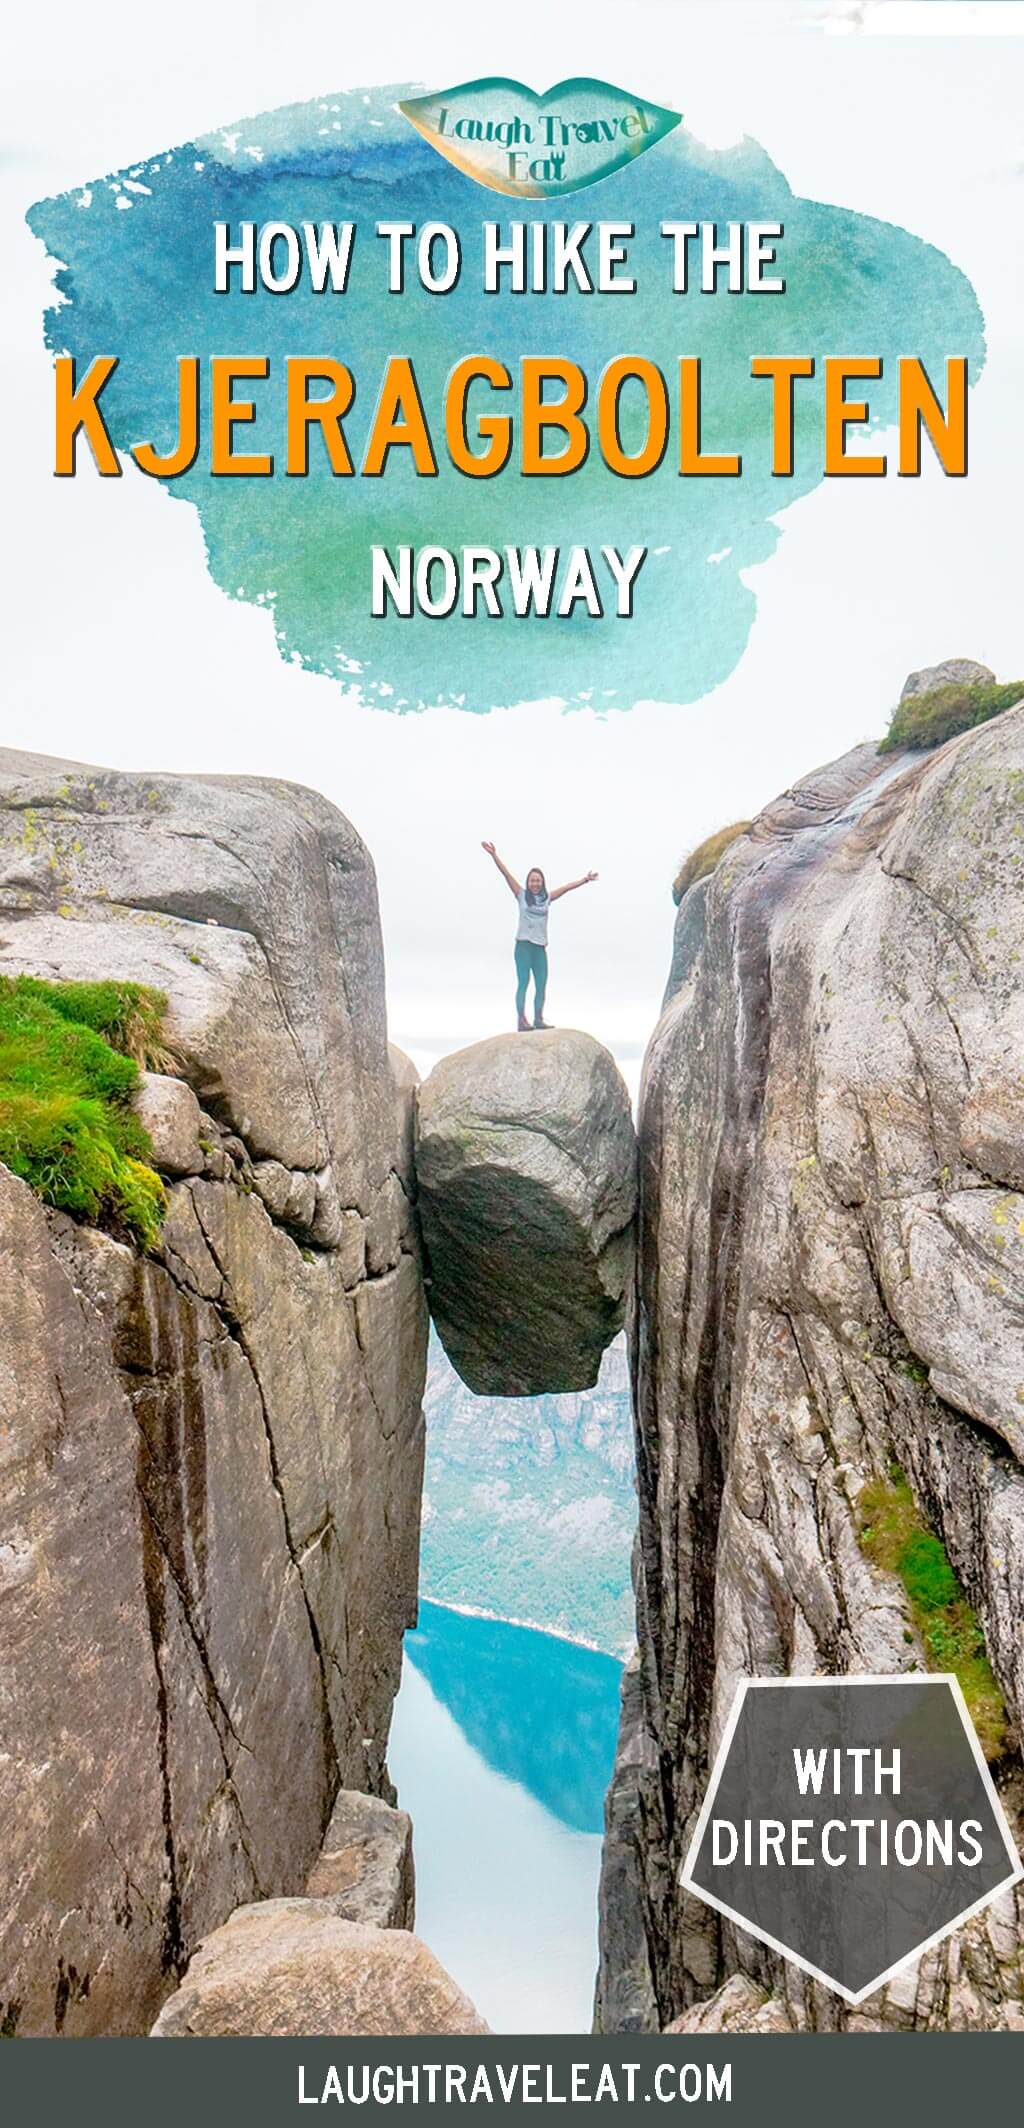 The Kjeragbolten hike is a great add-on or alternative to Pulpit Rock in Norway, and here's how to get there + hike it: